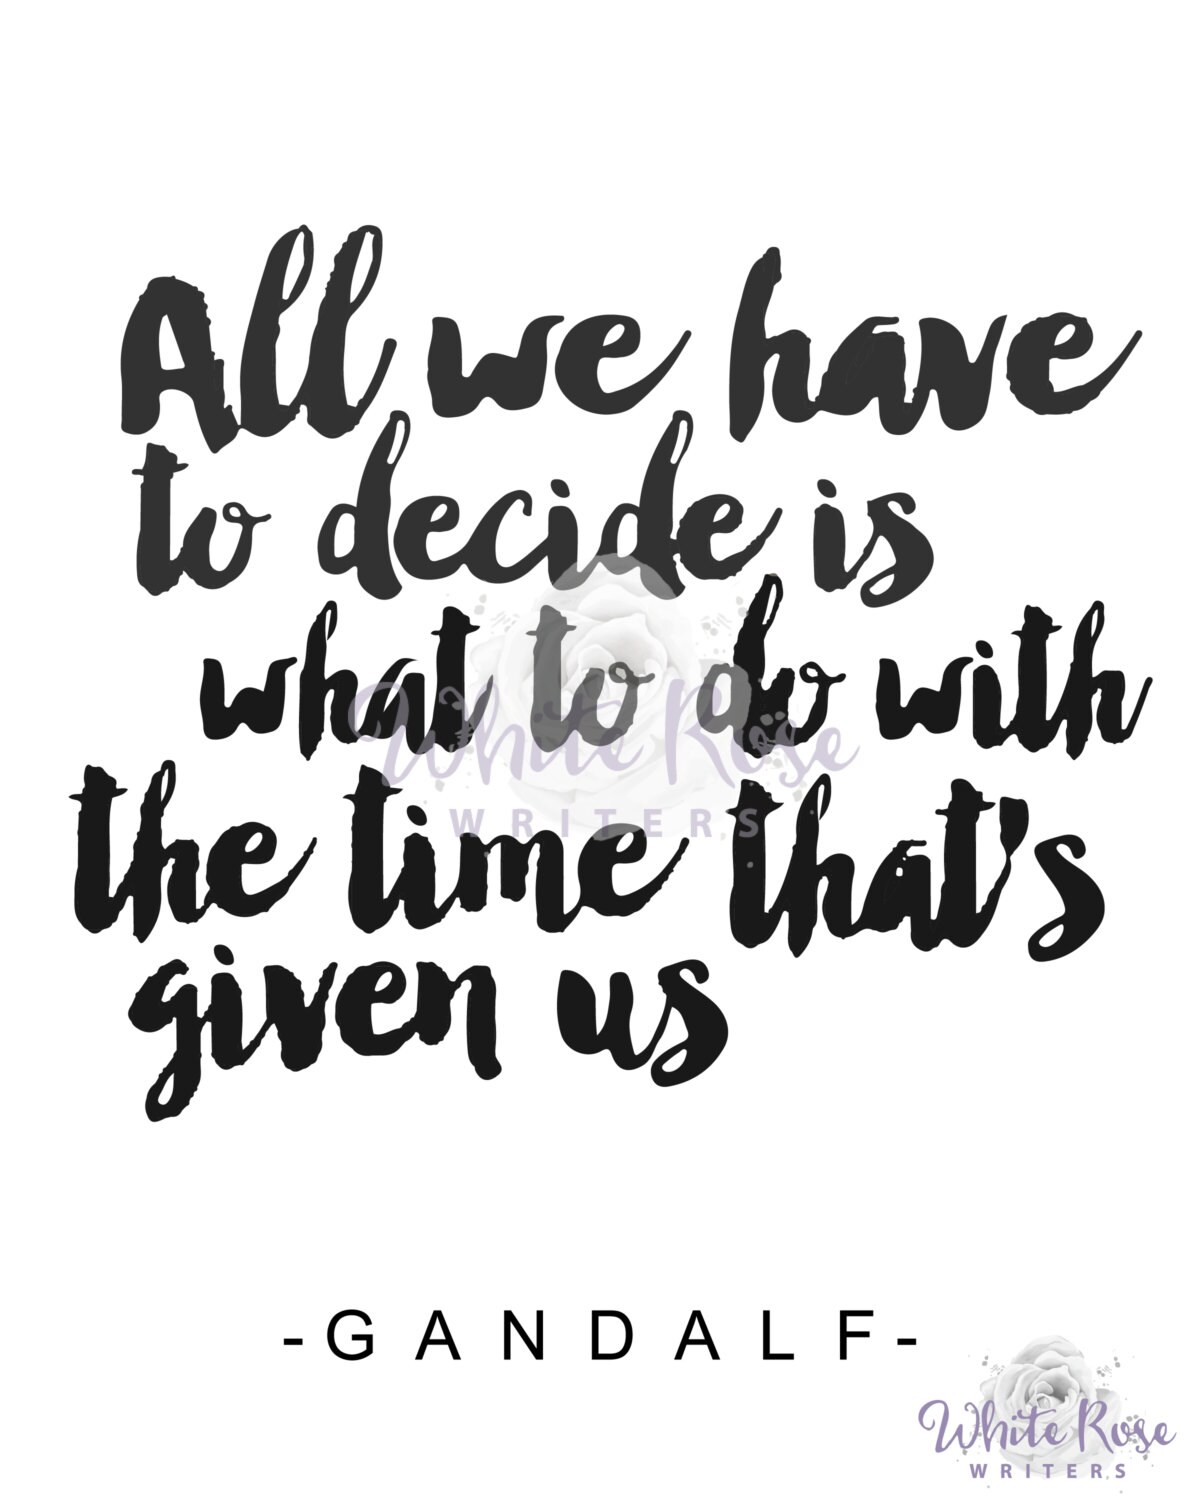 Printable Lord of the rings poster // Gandalf Quote // Time | Etsy